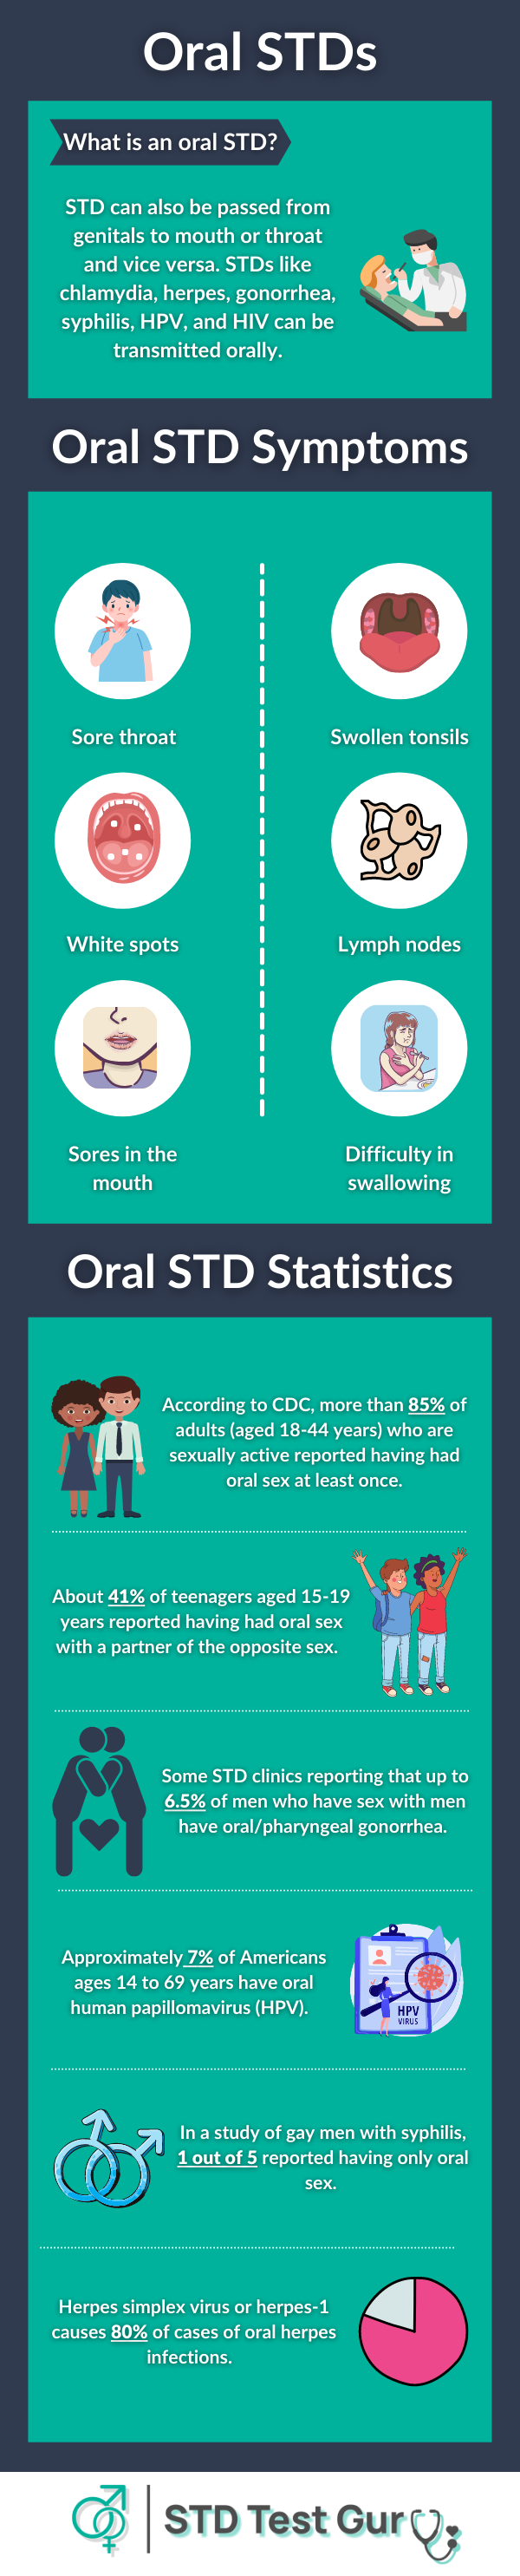 Sore throat causing STDs and Oral STDs Symptoms and Statistics